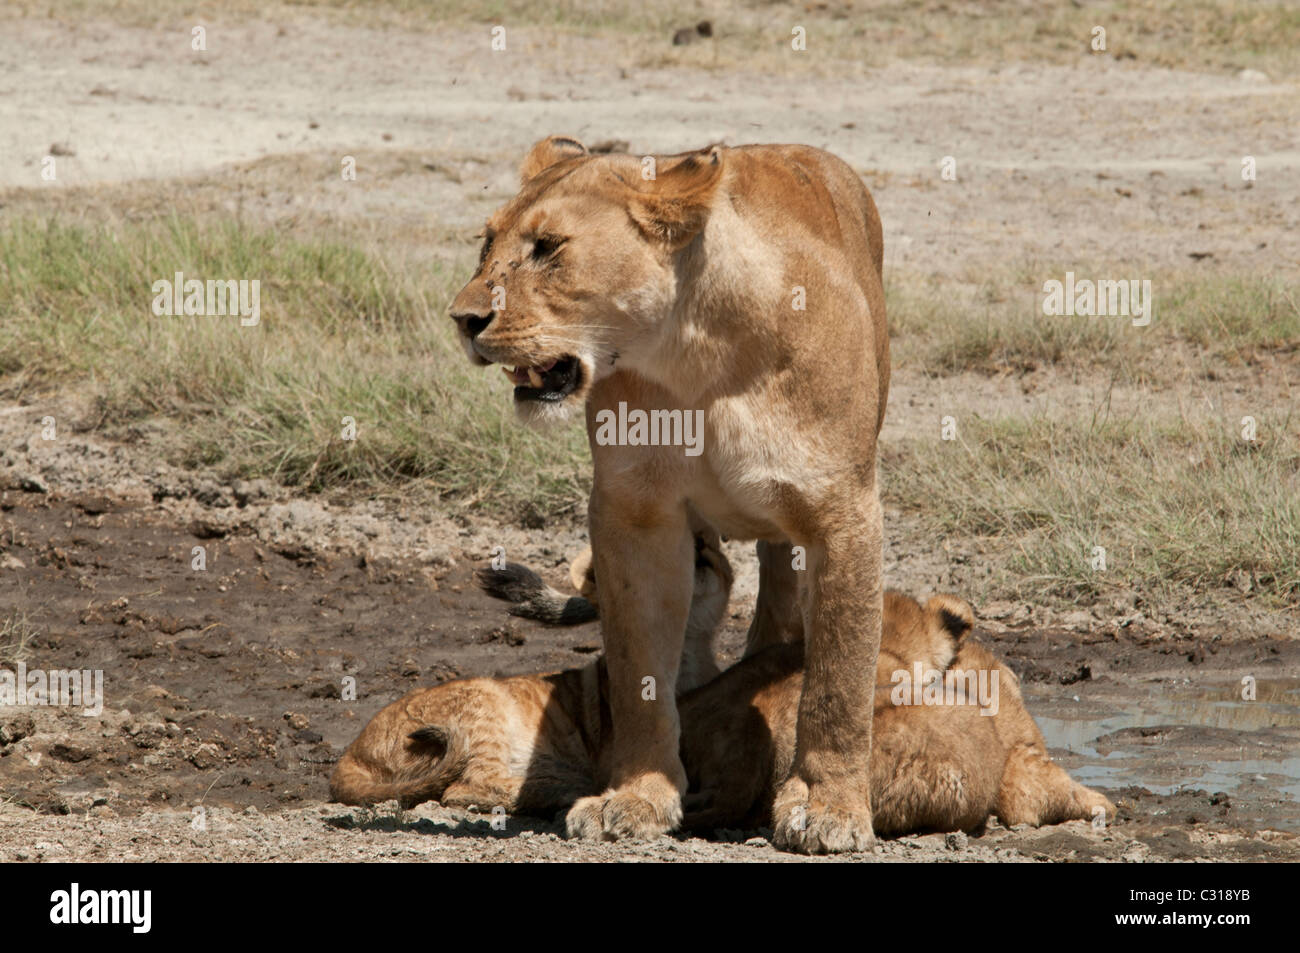 Stock photo of three lion cubs finding shade under their mom. Stock Photo